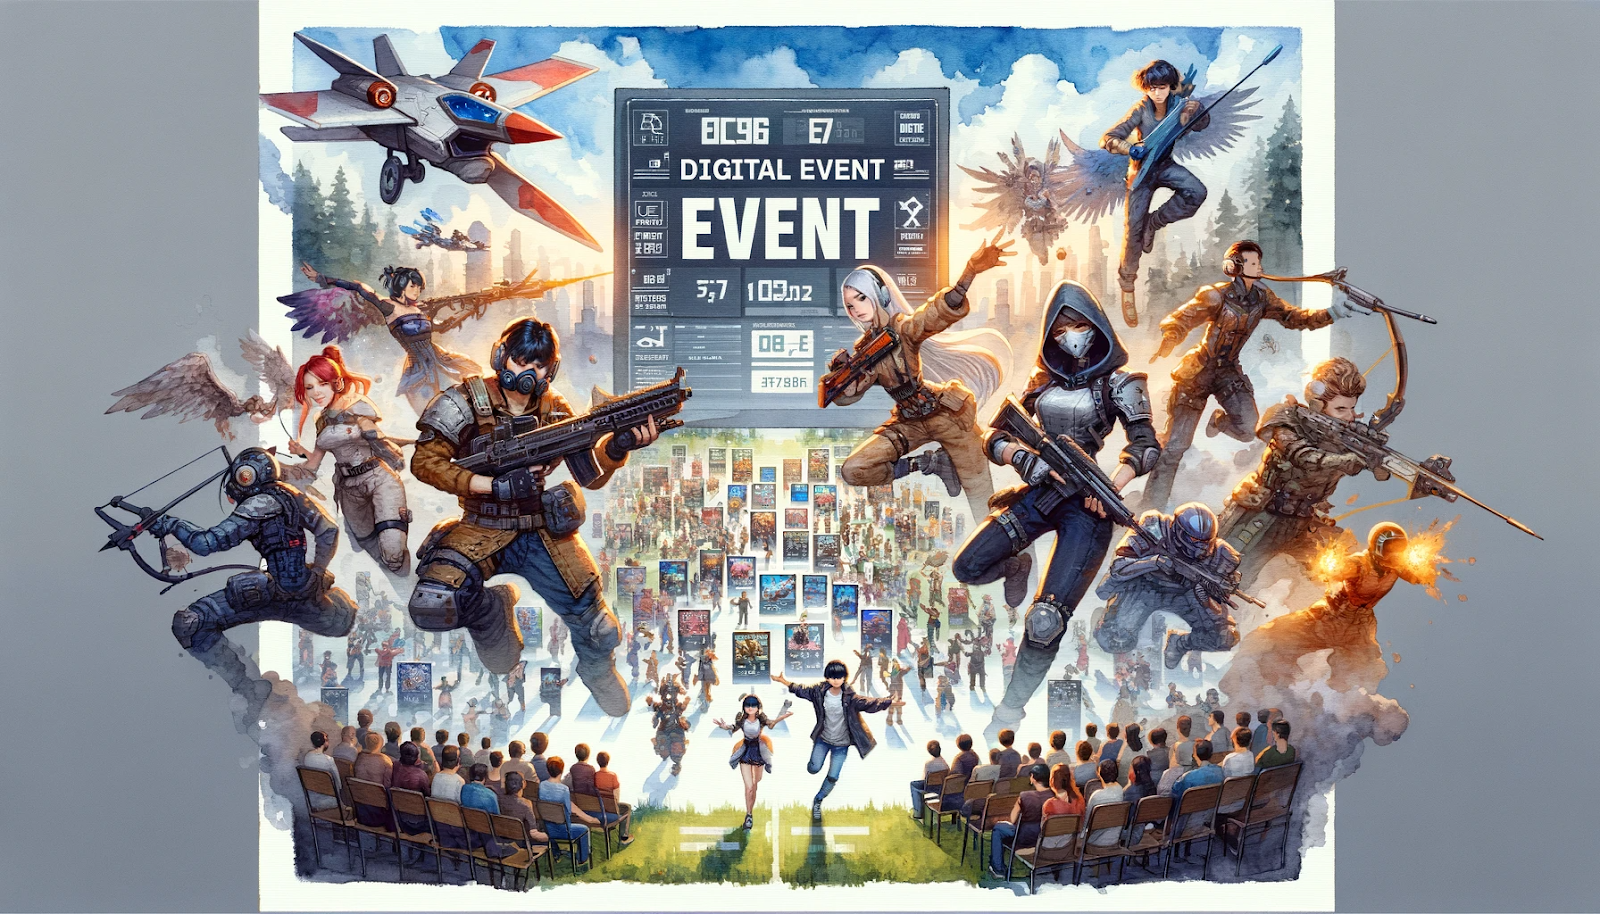 a digital event poster for an in-game event. It features game characters participating in various competitions and activities